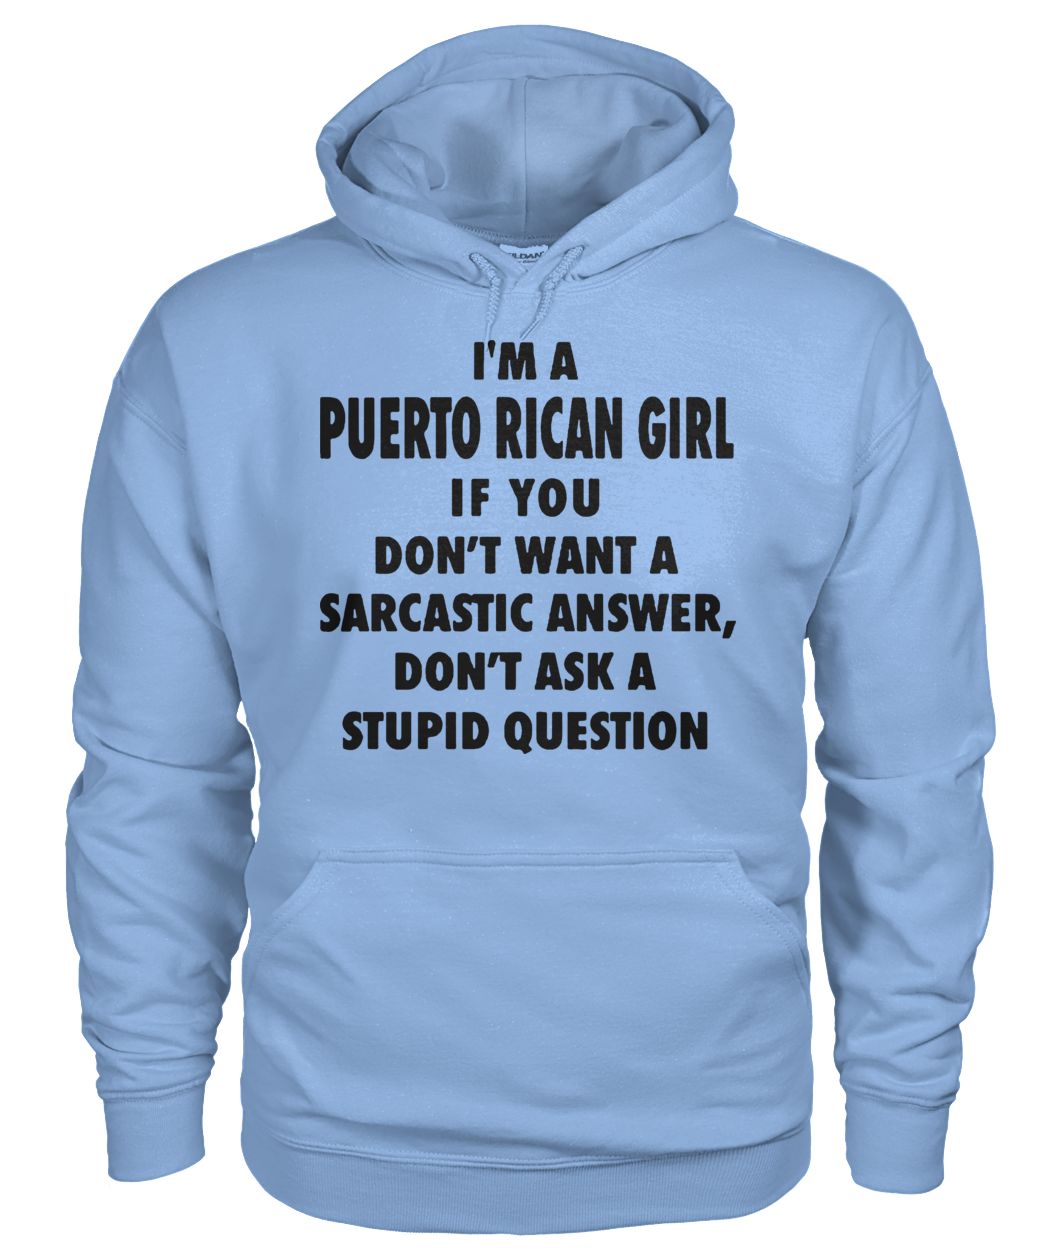 I'm an puerto rican girl if you don't want a sarcastic answer don't ask a stupid question gildan hoodie